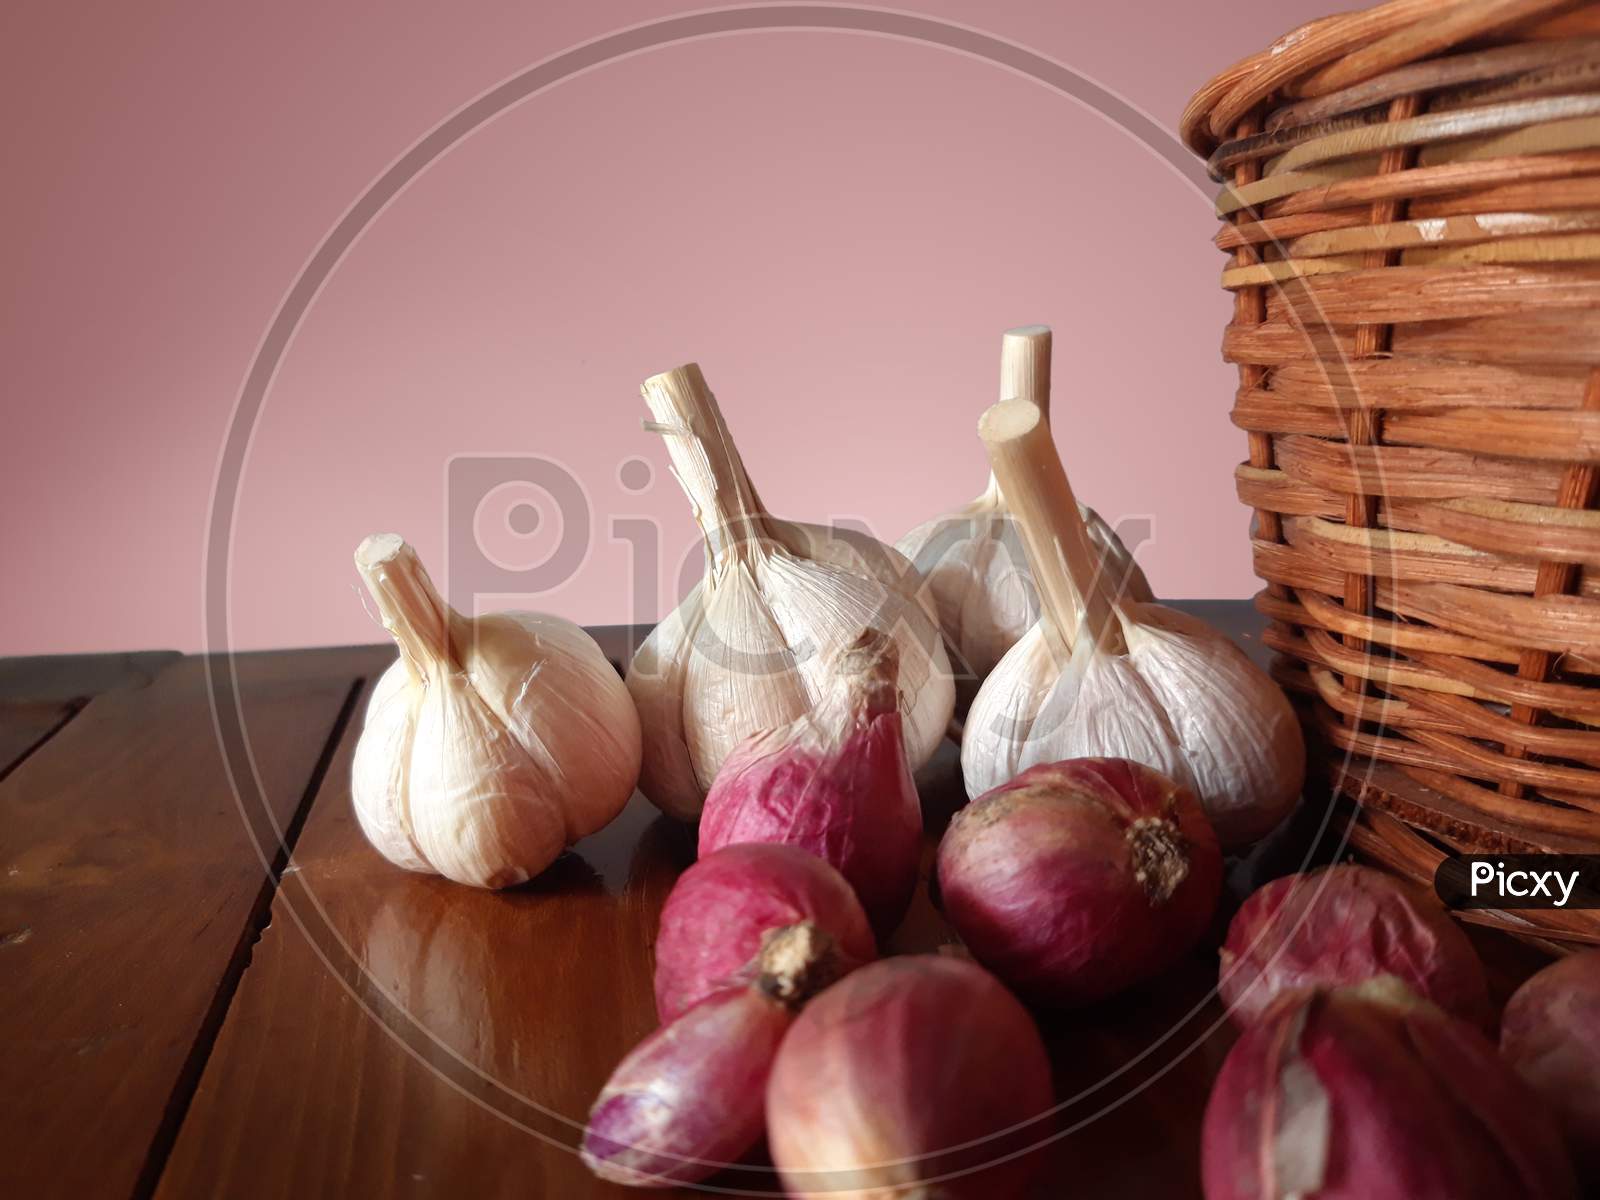 Shallots And Garlic Beside The Wicker Basket